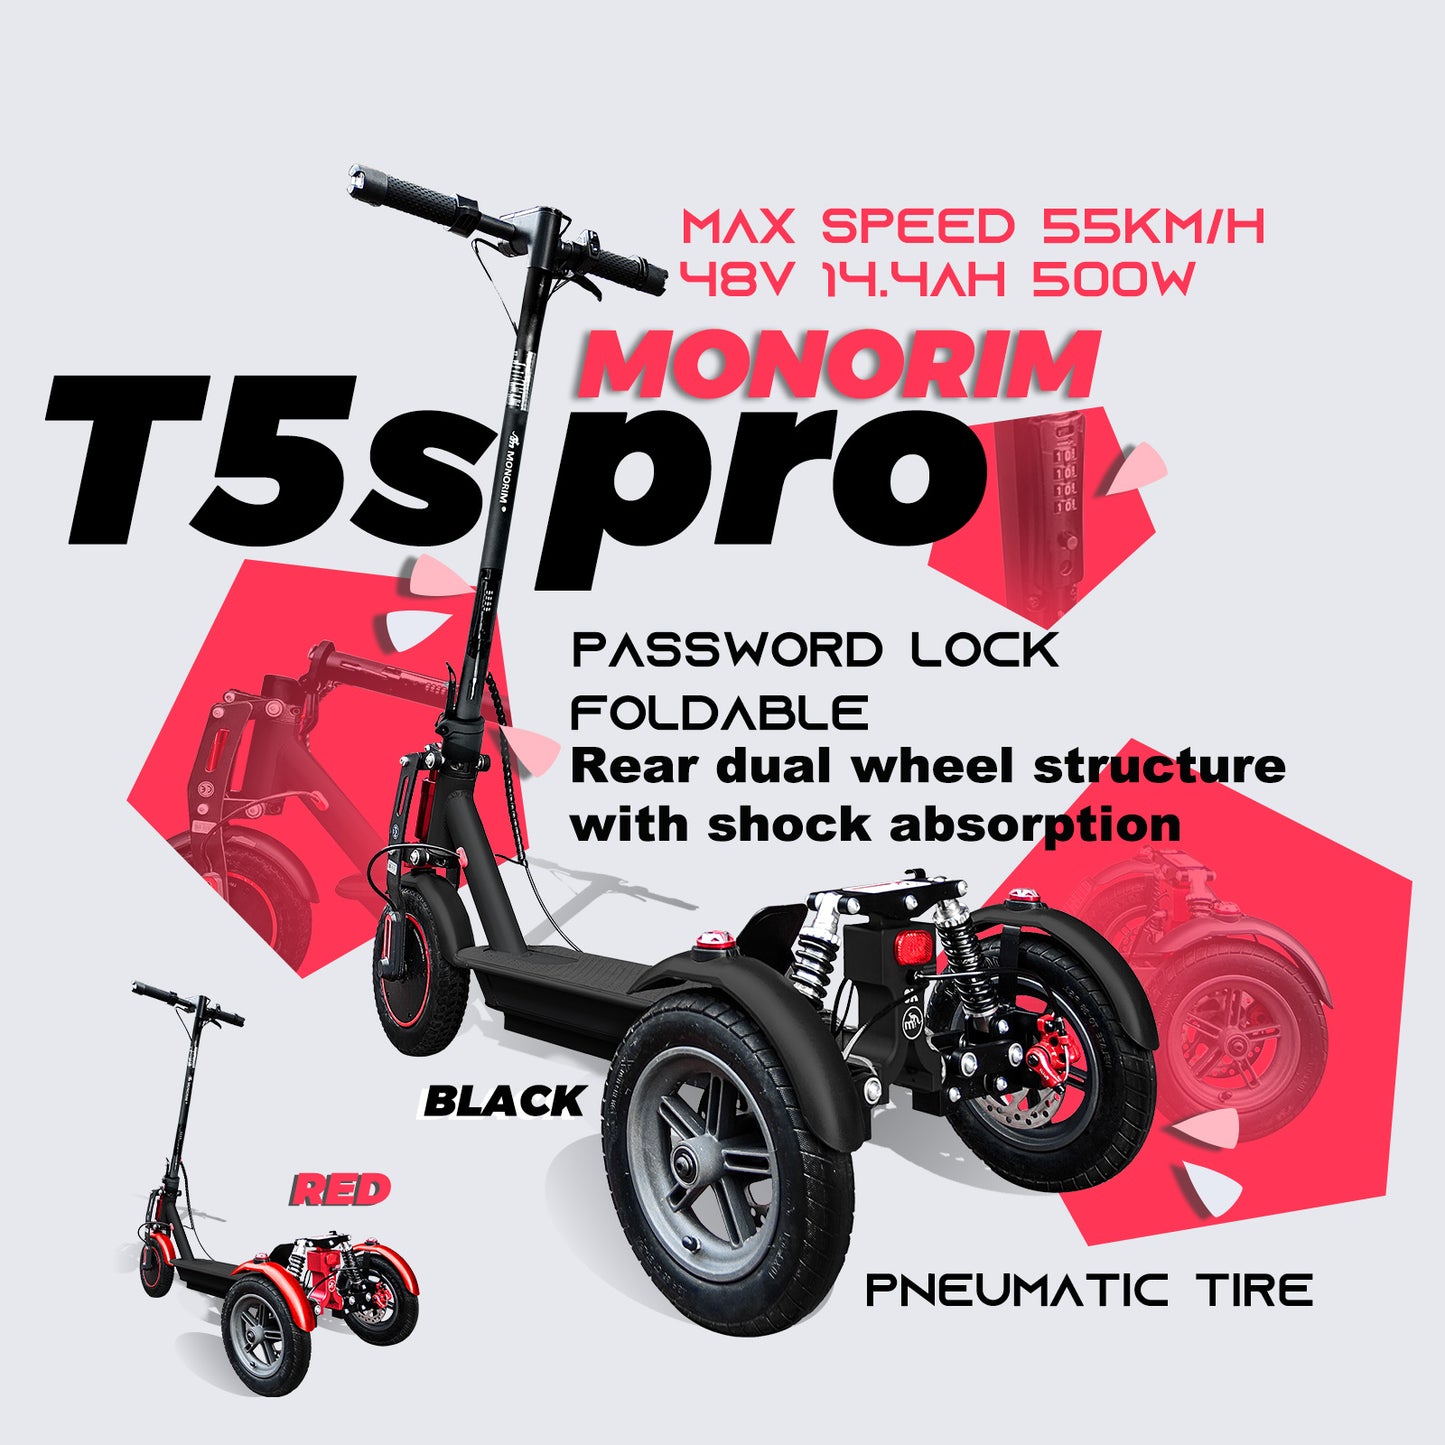 （preorder ）🥇Monorim T5s pro x3wheel support for carrying kit 48v 500w 14.4ah 55km/h 🔥